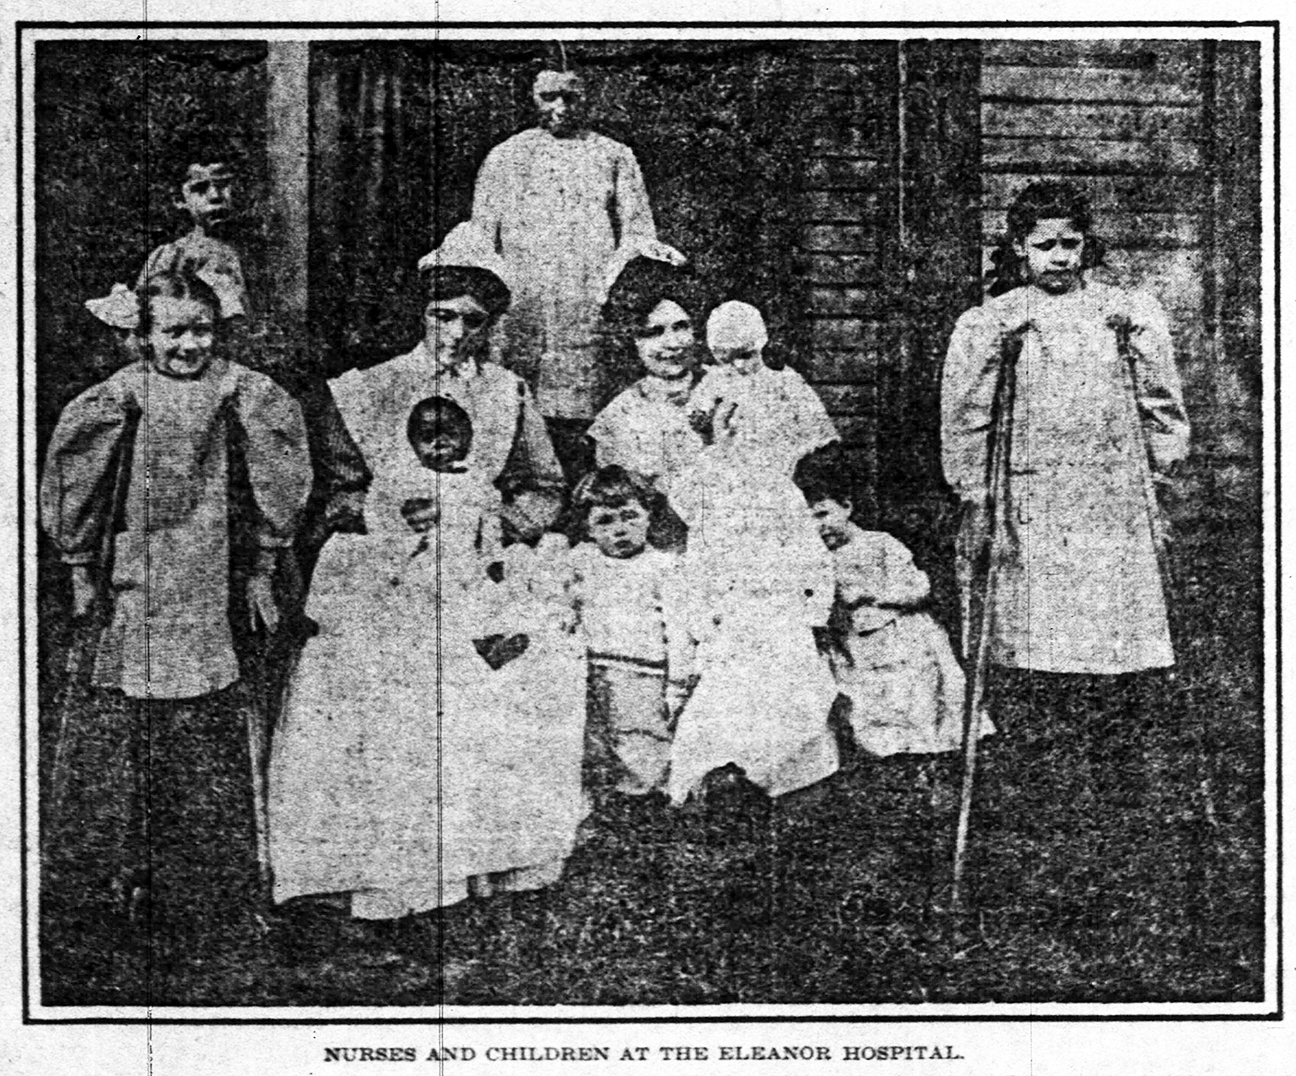 A newspaper clipping showing two women in aprons surrounded by several children of varying ages. 